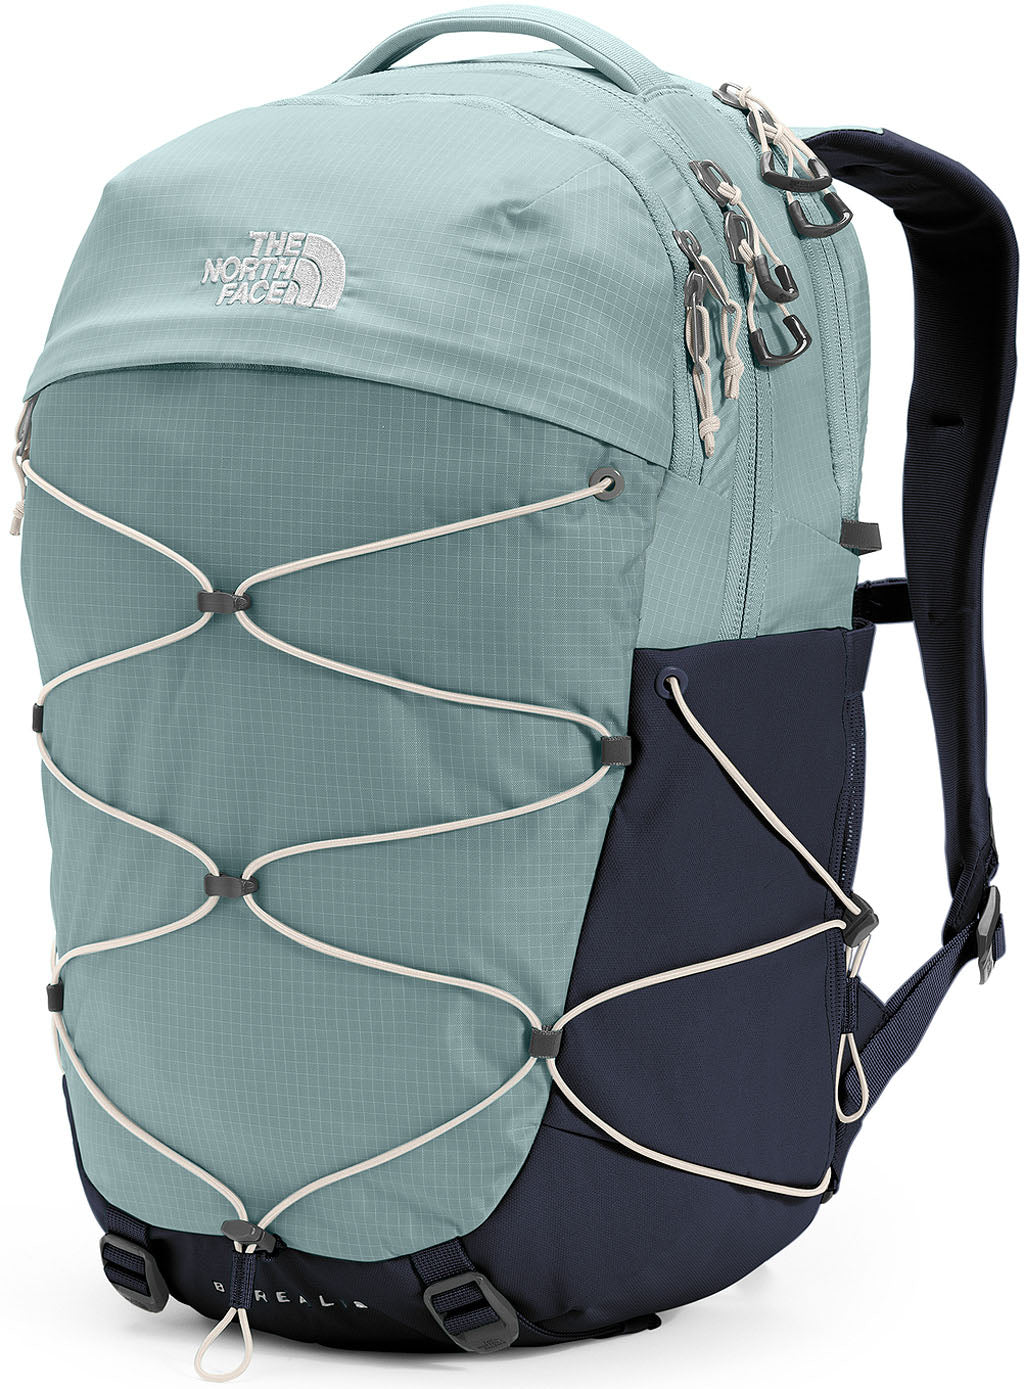 The North Face Borealis Backpack 28L - Women's